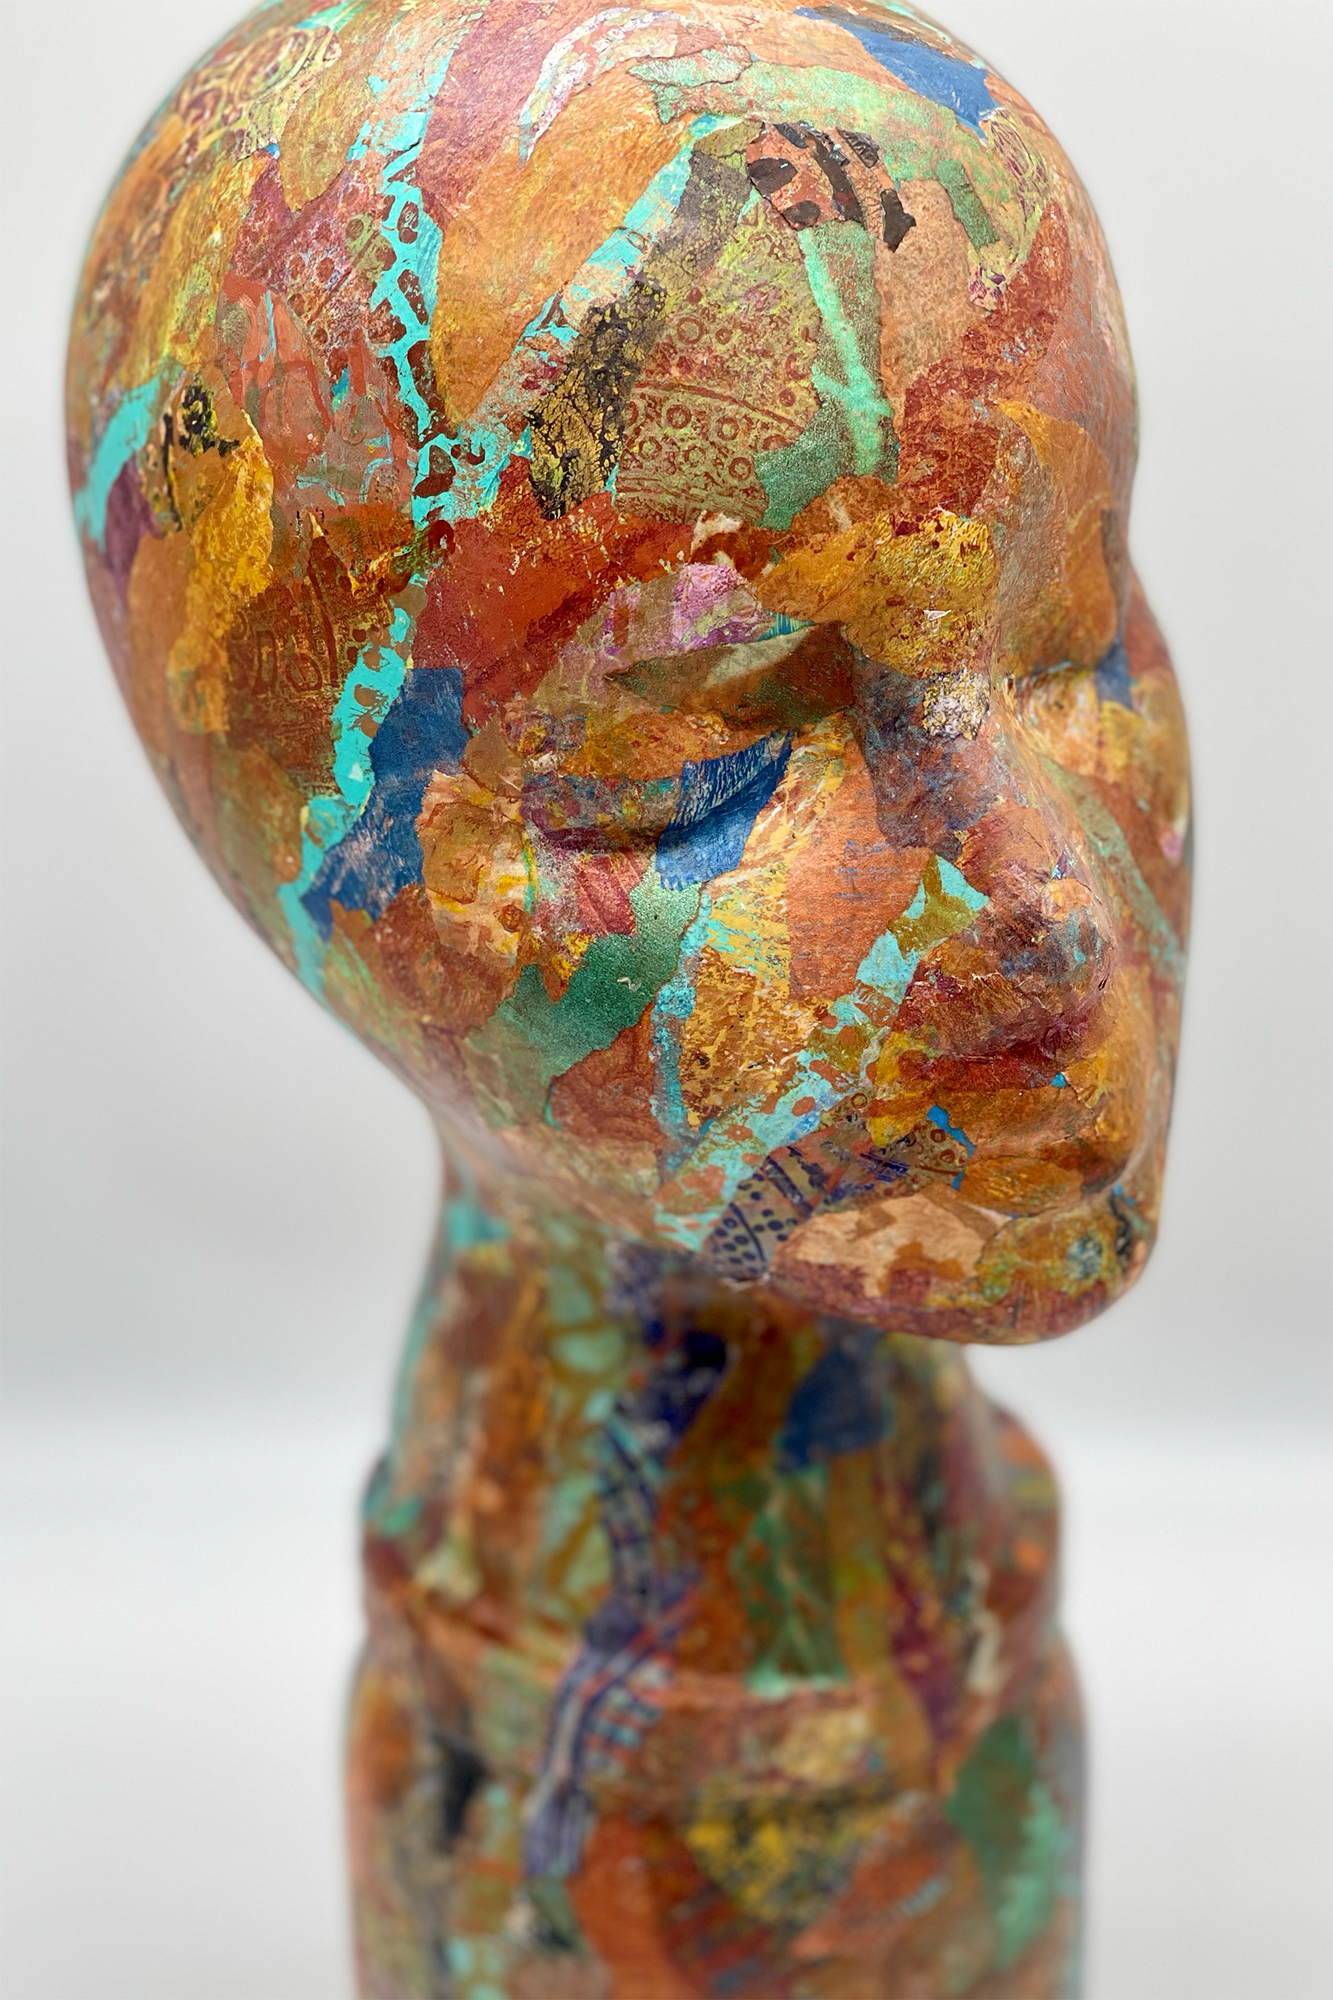 A photograph of an original sculpture by A.H. Lawver, entitled "Liv". It's a bald, minimalist head, splattered with a wide variety of color monoprints.